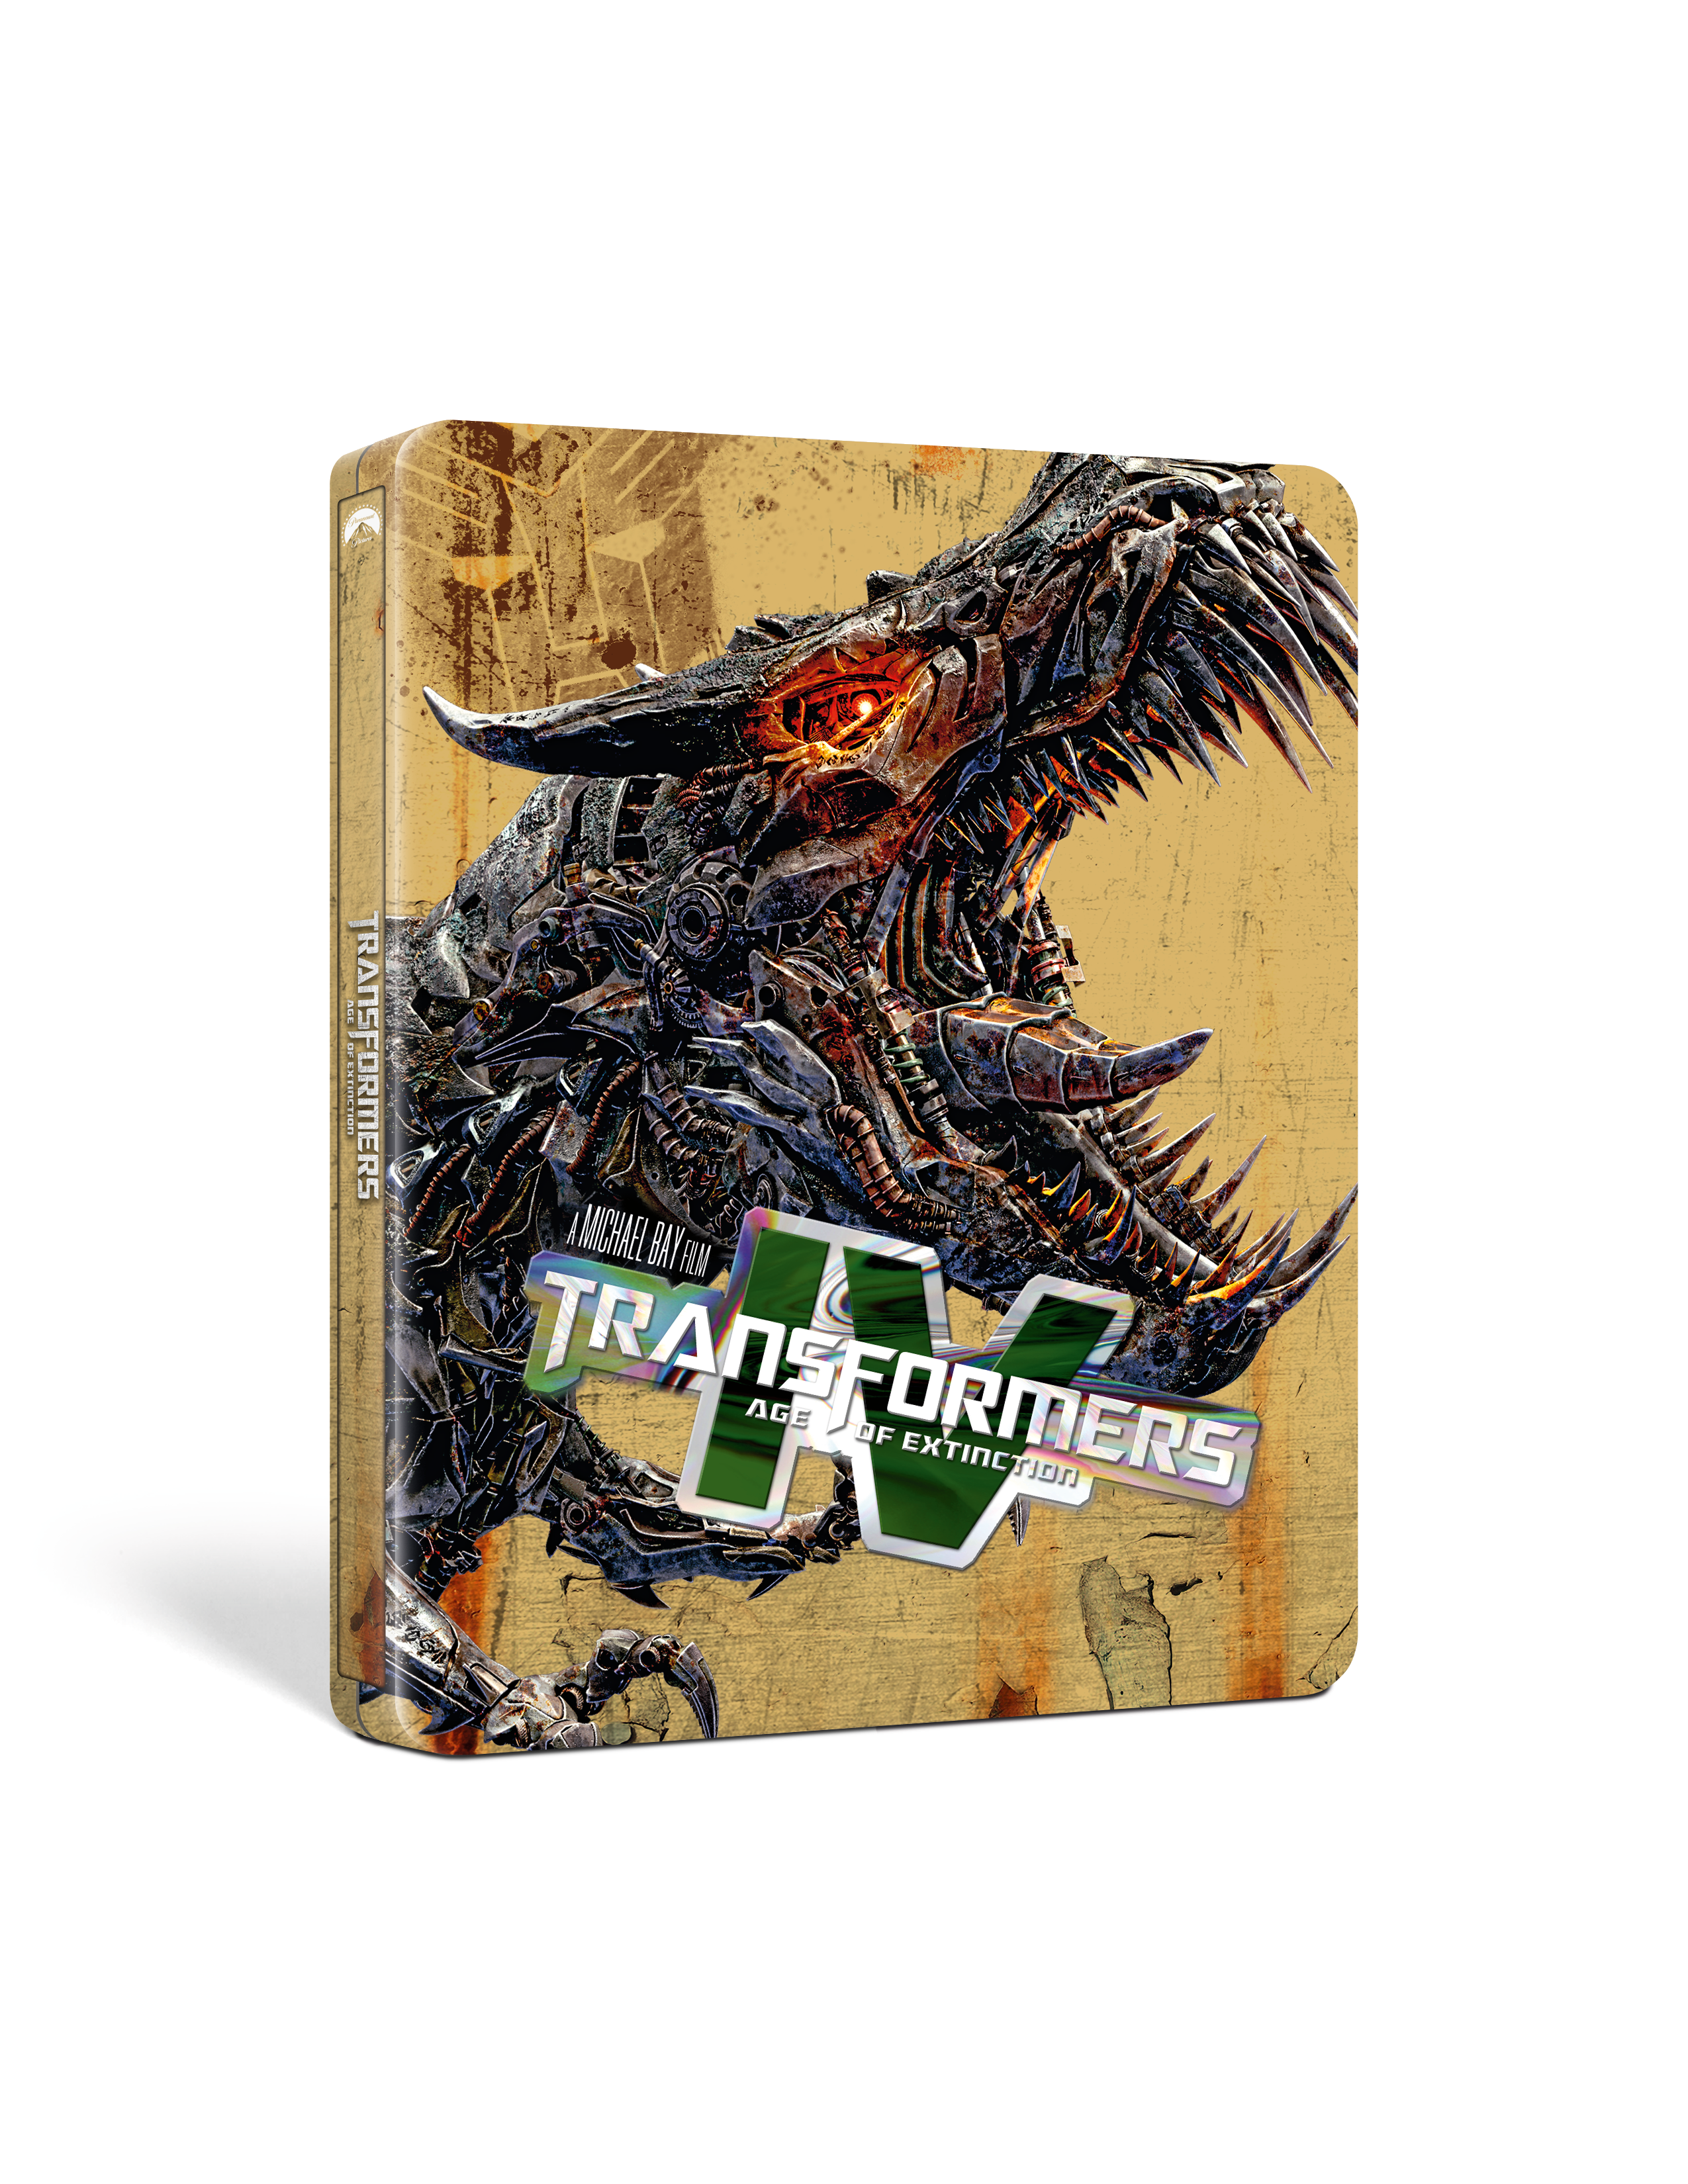 Get Ready for Action with the TRANSFORMERS 6-Movie SteelBook Collection Arriving on May 30th 21